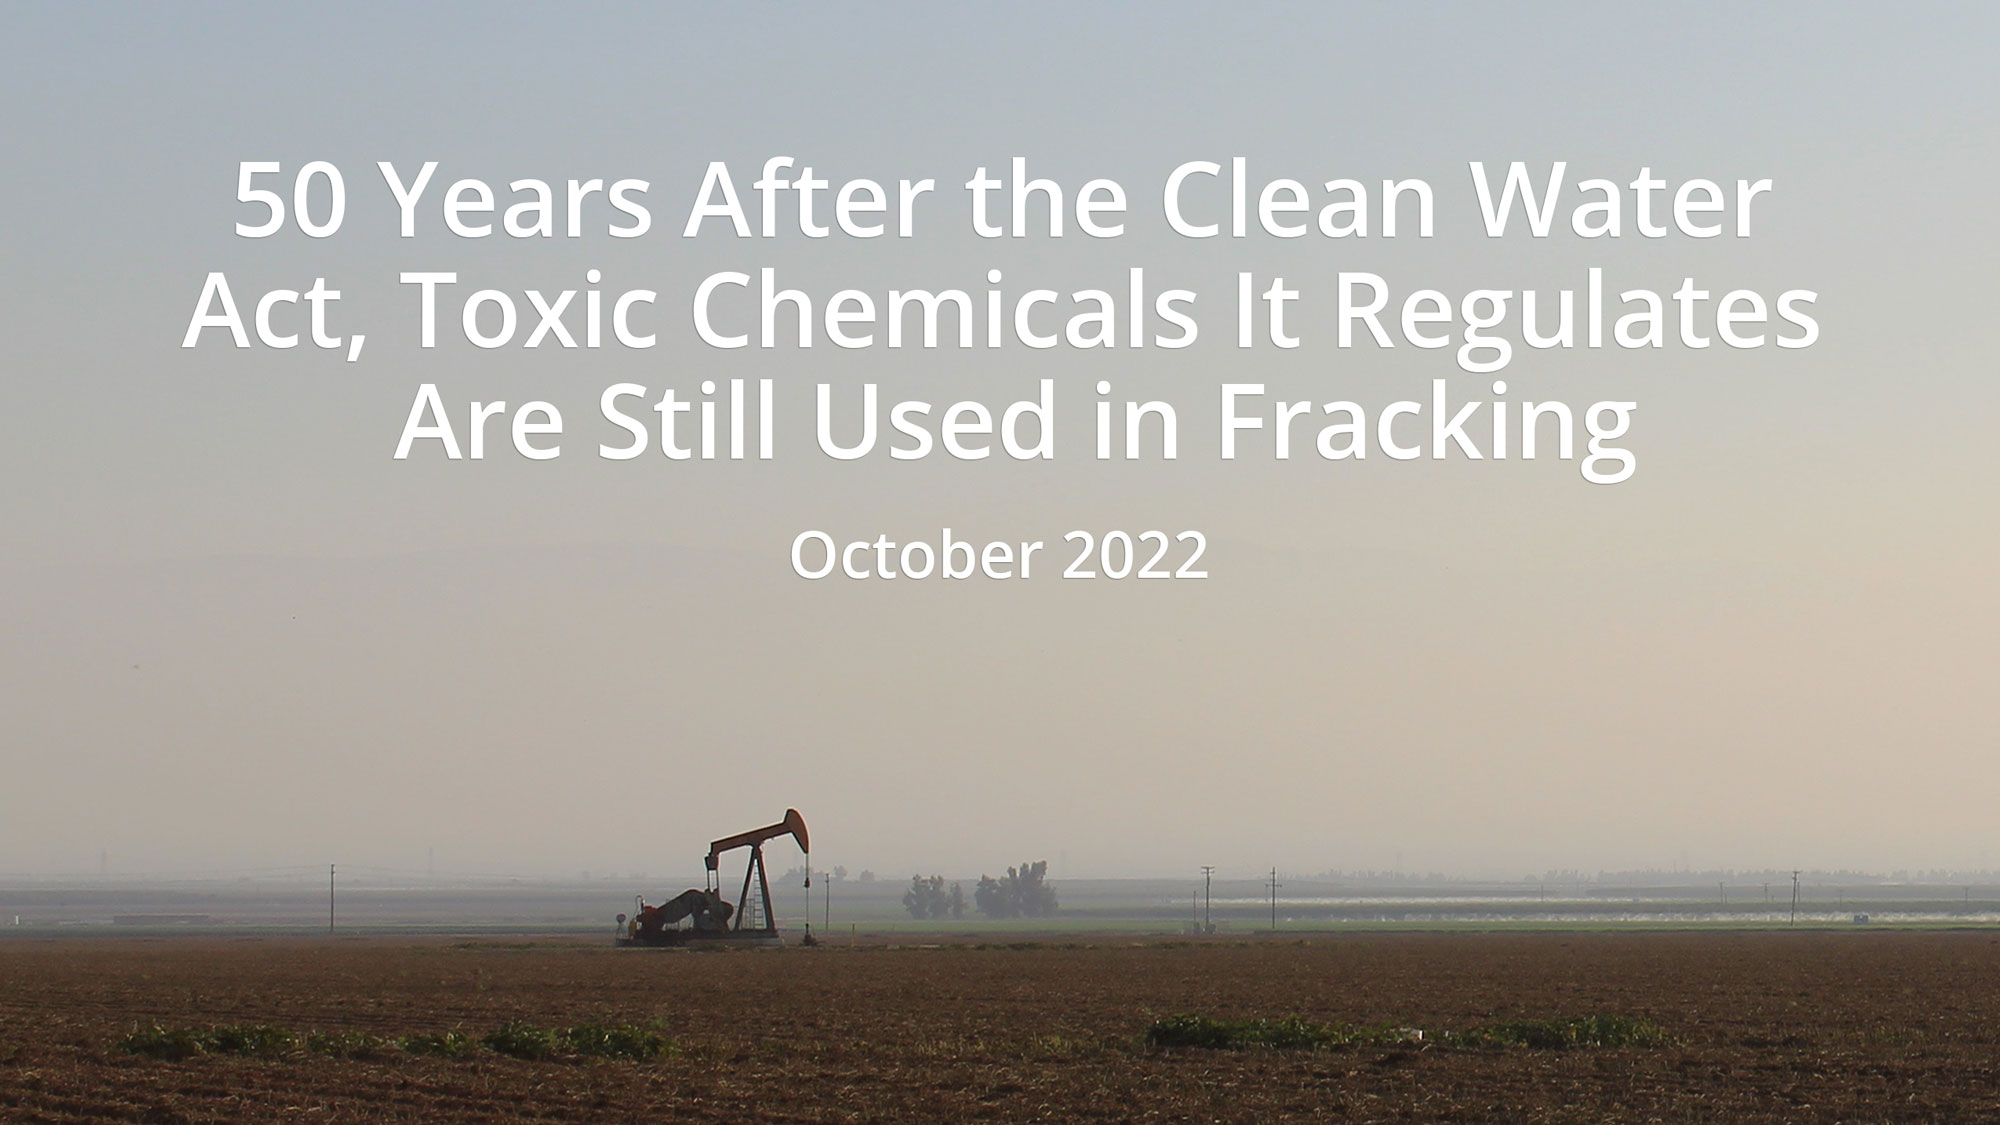 EDGI Releases Report: 50 Years After the Clean Water Act, Toxic Chemicals it Regulates are Still Used in Fracking